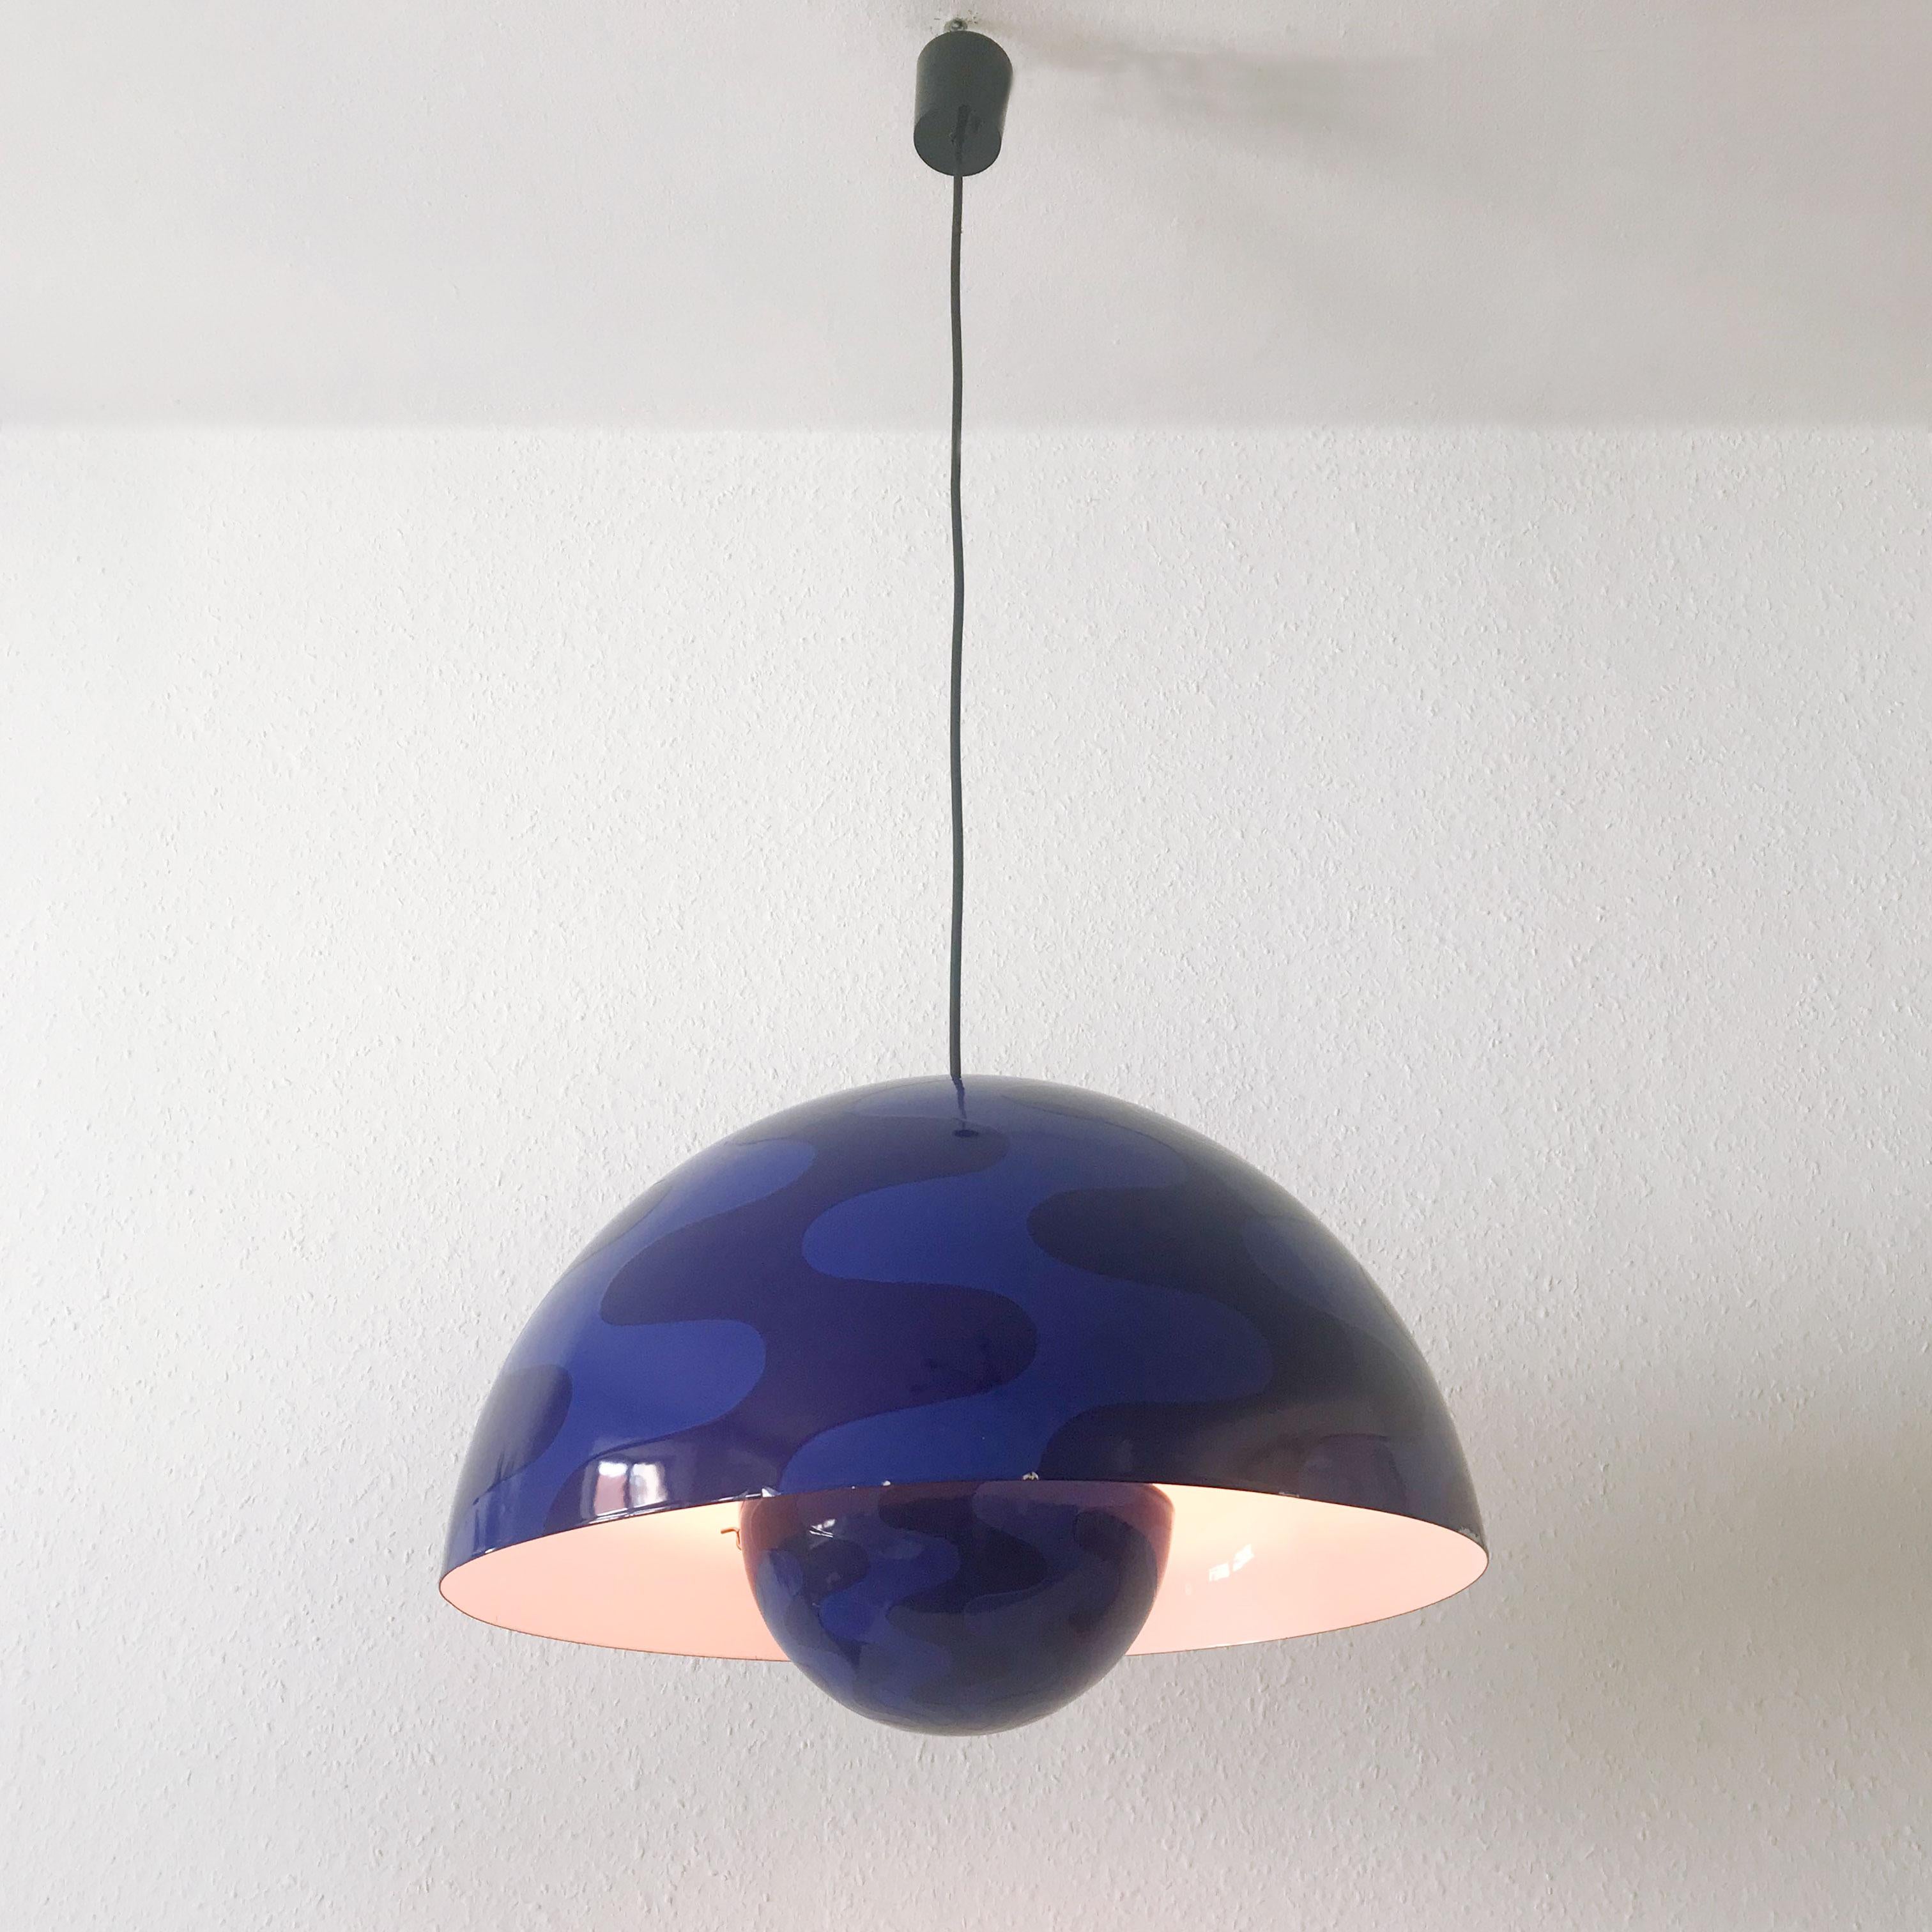 Rare and Large Flower Pot Pendant Lamp by Verner Panton for Louis Poulsen 1971 In Good Condition For Sale In Munich, DE